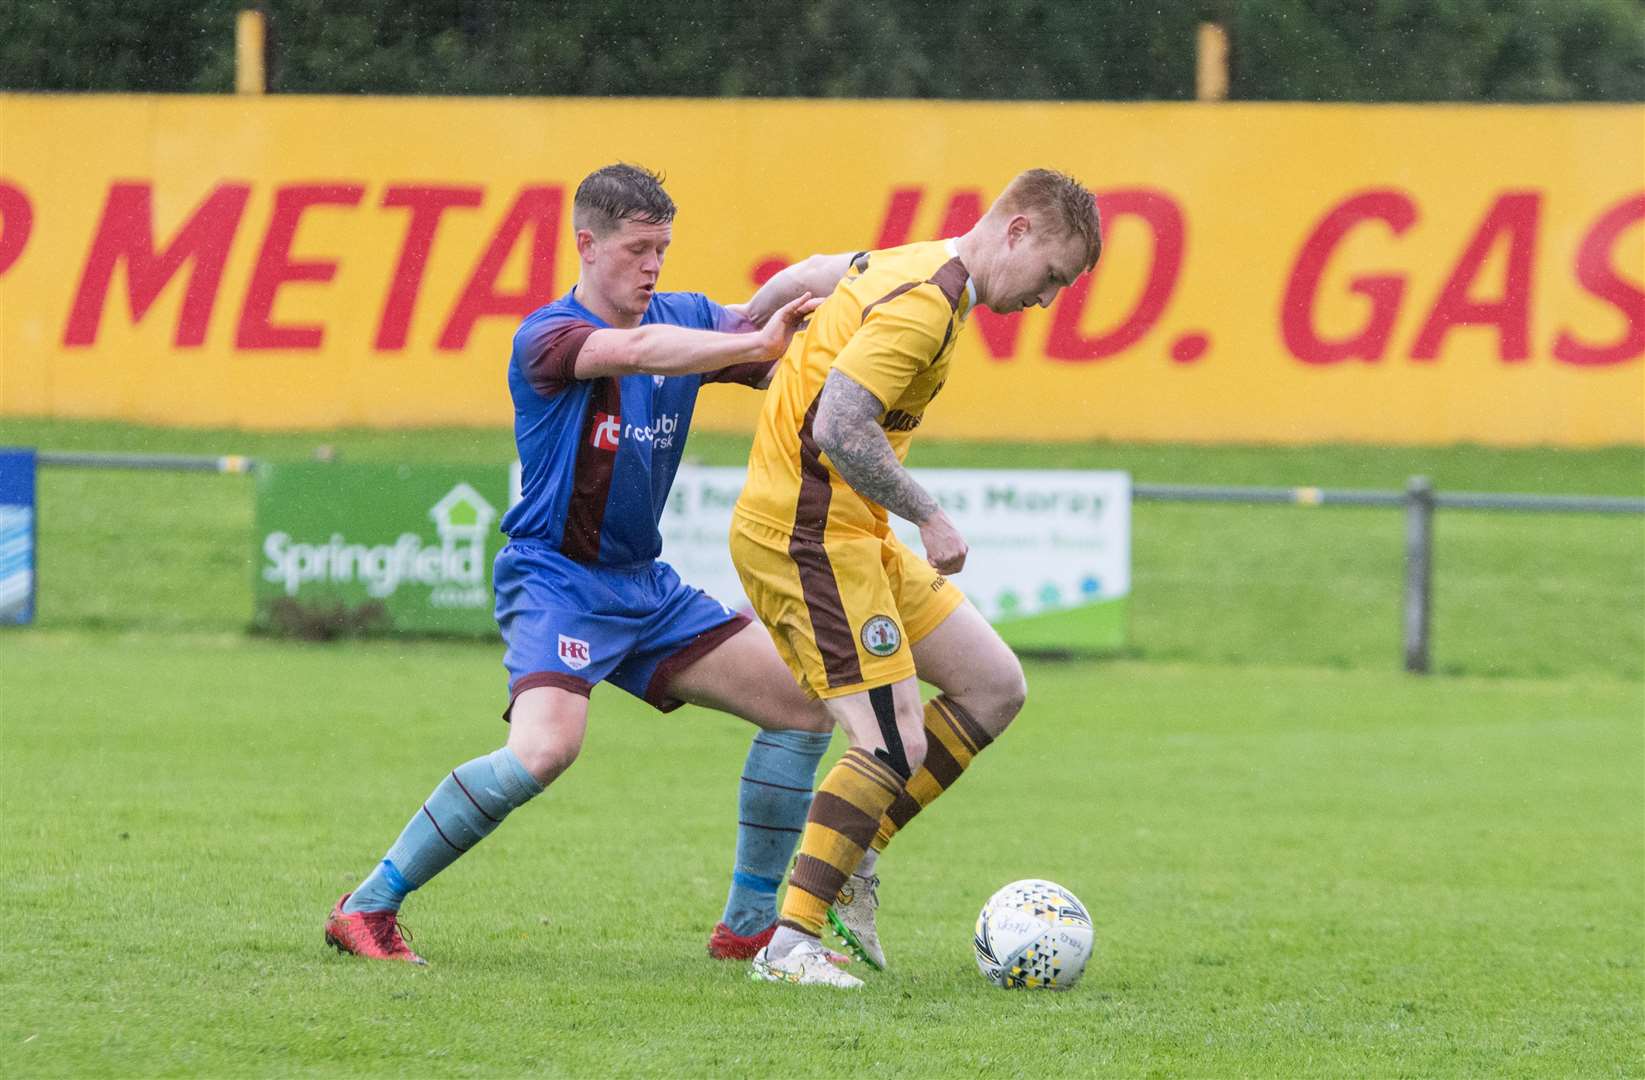 Forres' Stuart Soane scored in the 2-1 defeat. Picture: Becky Saunderson.